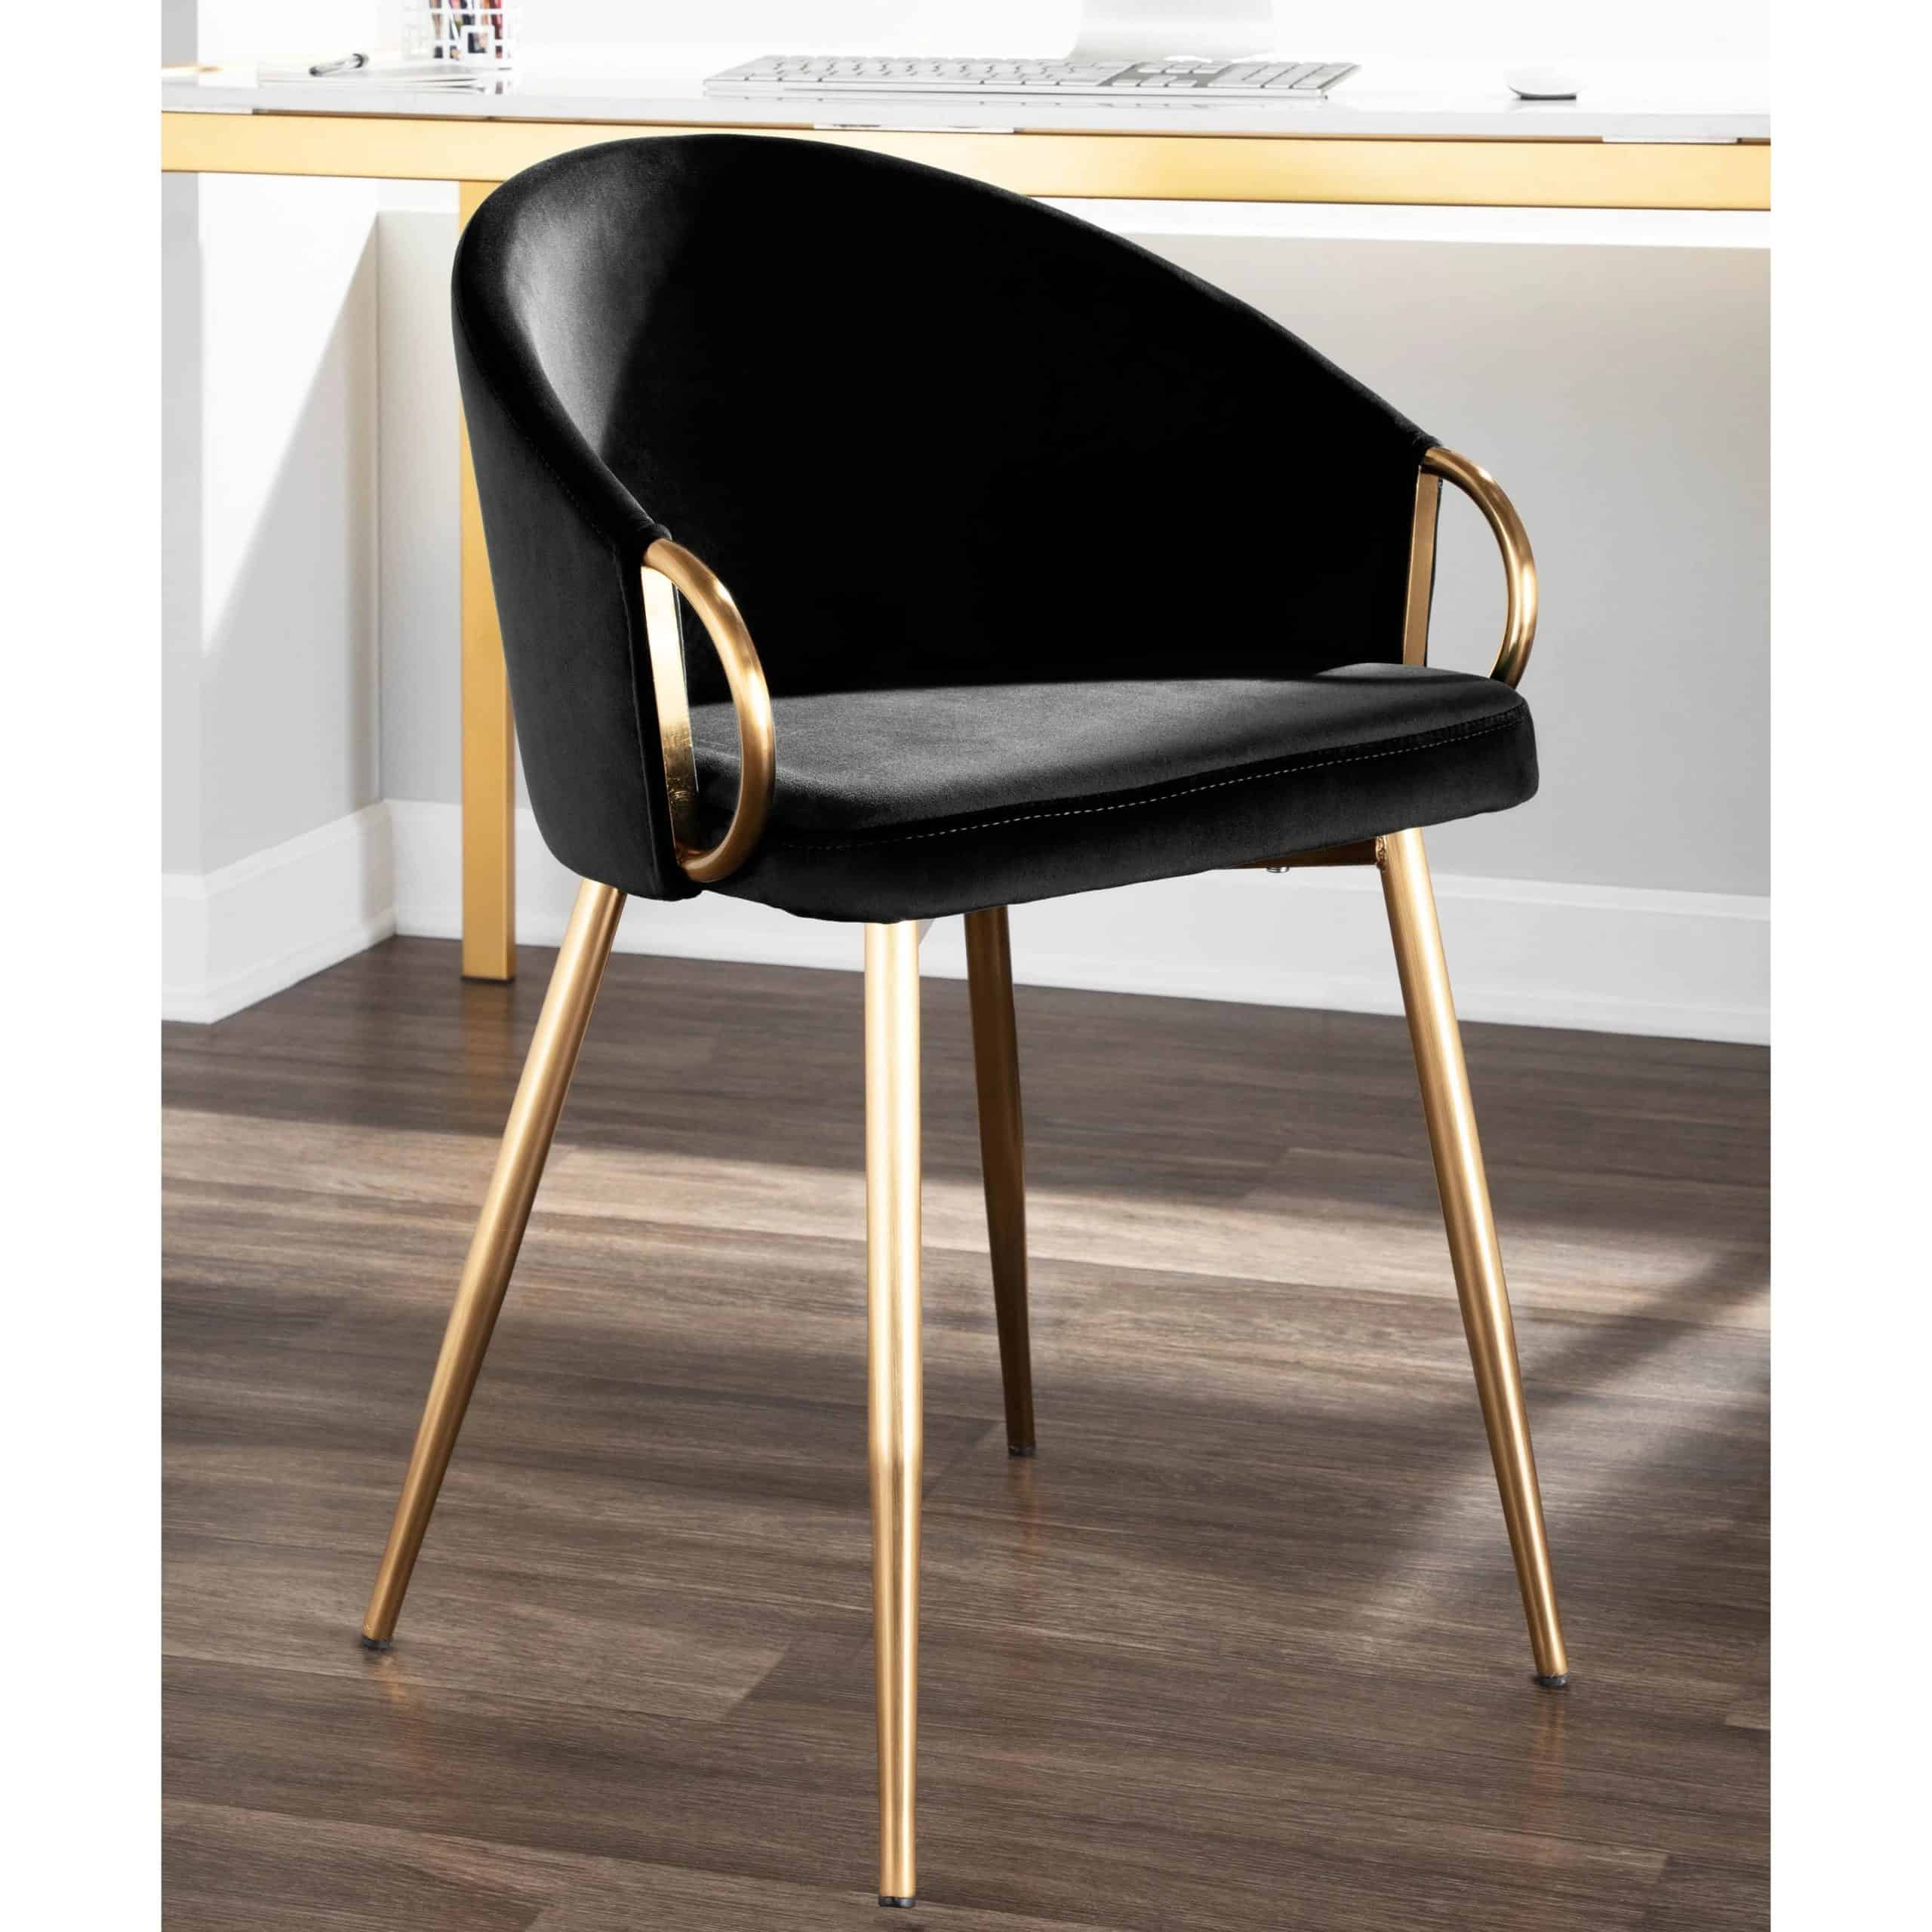 Add Some Drama With A Black And Gold Chair